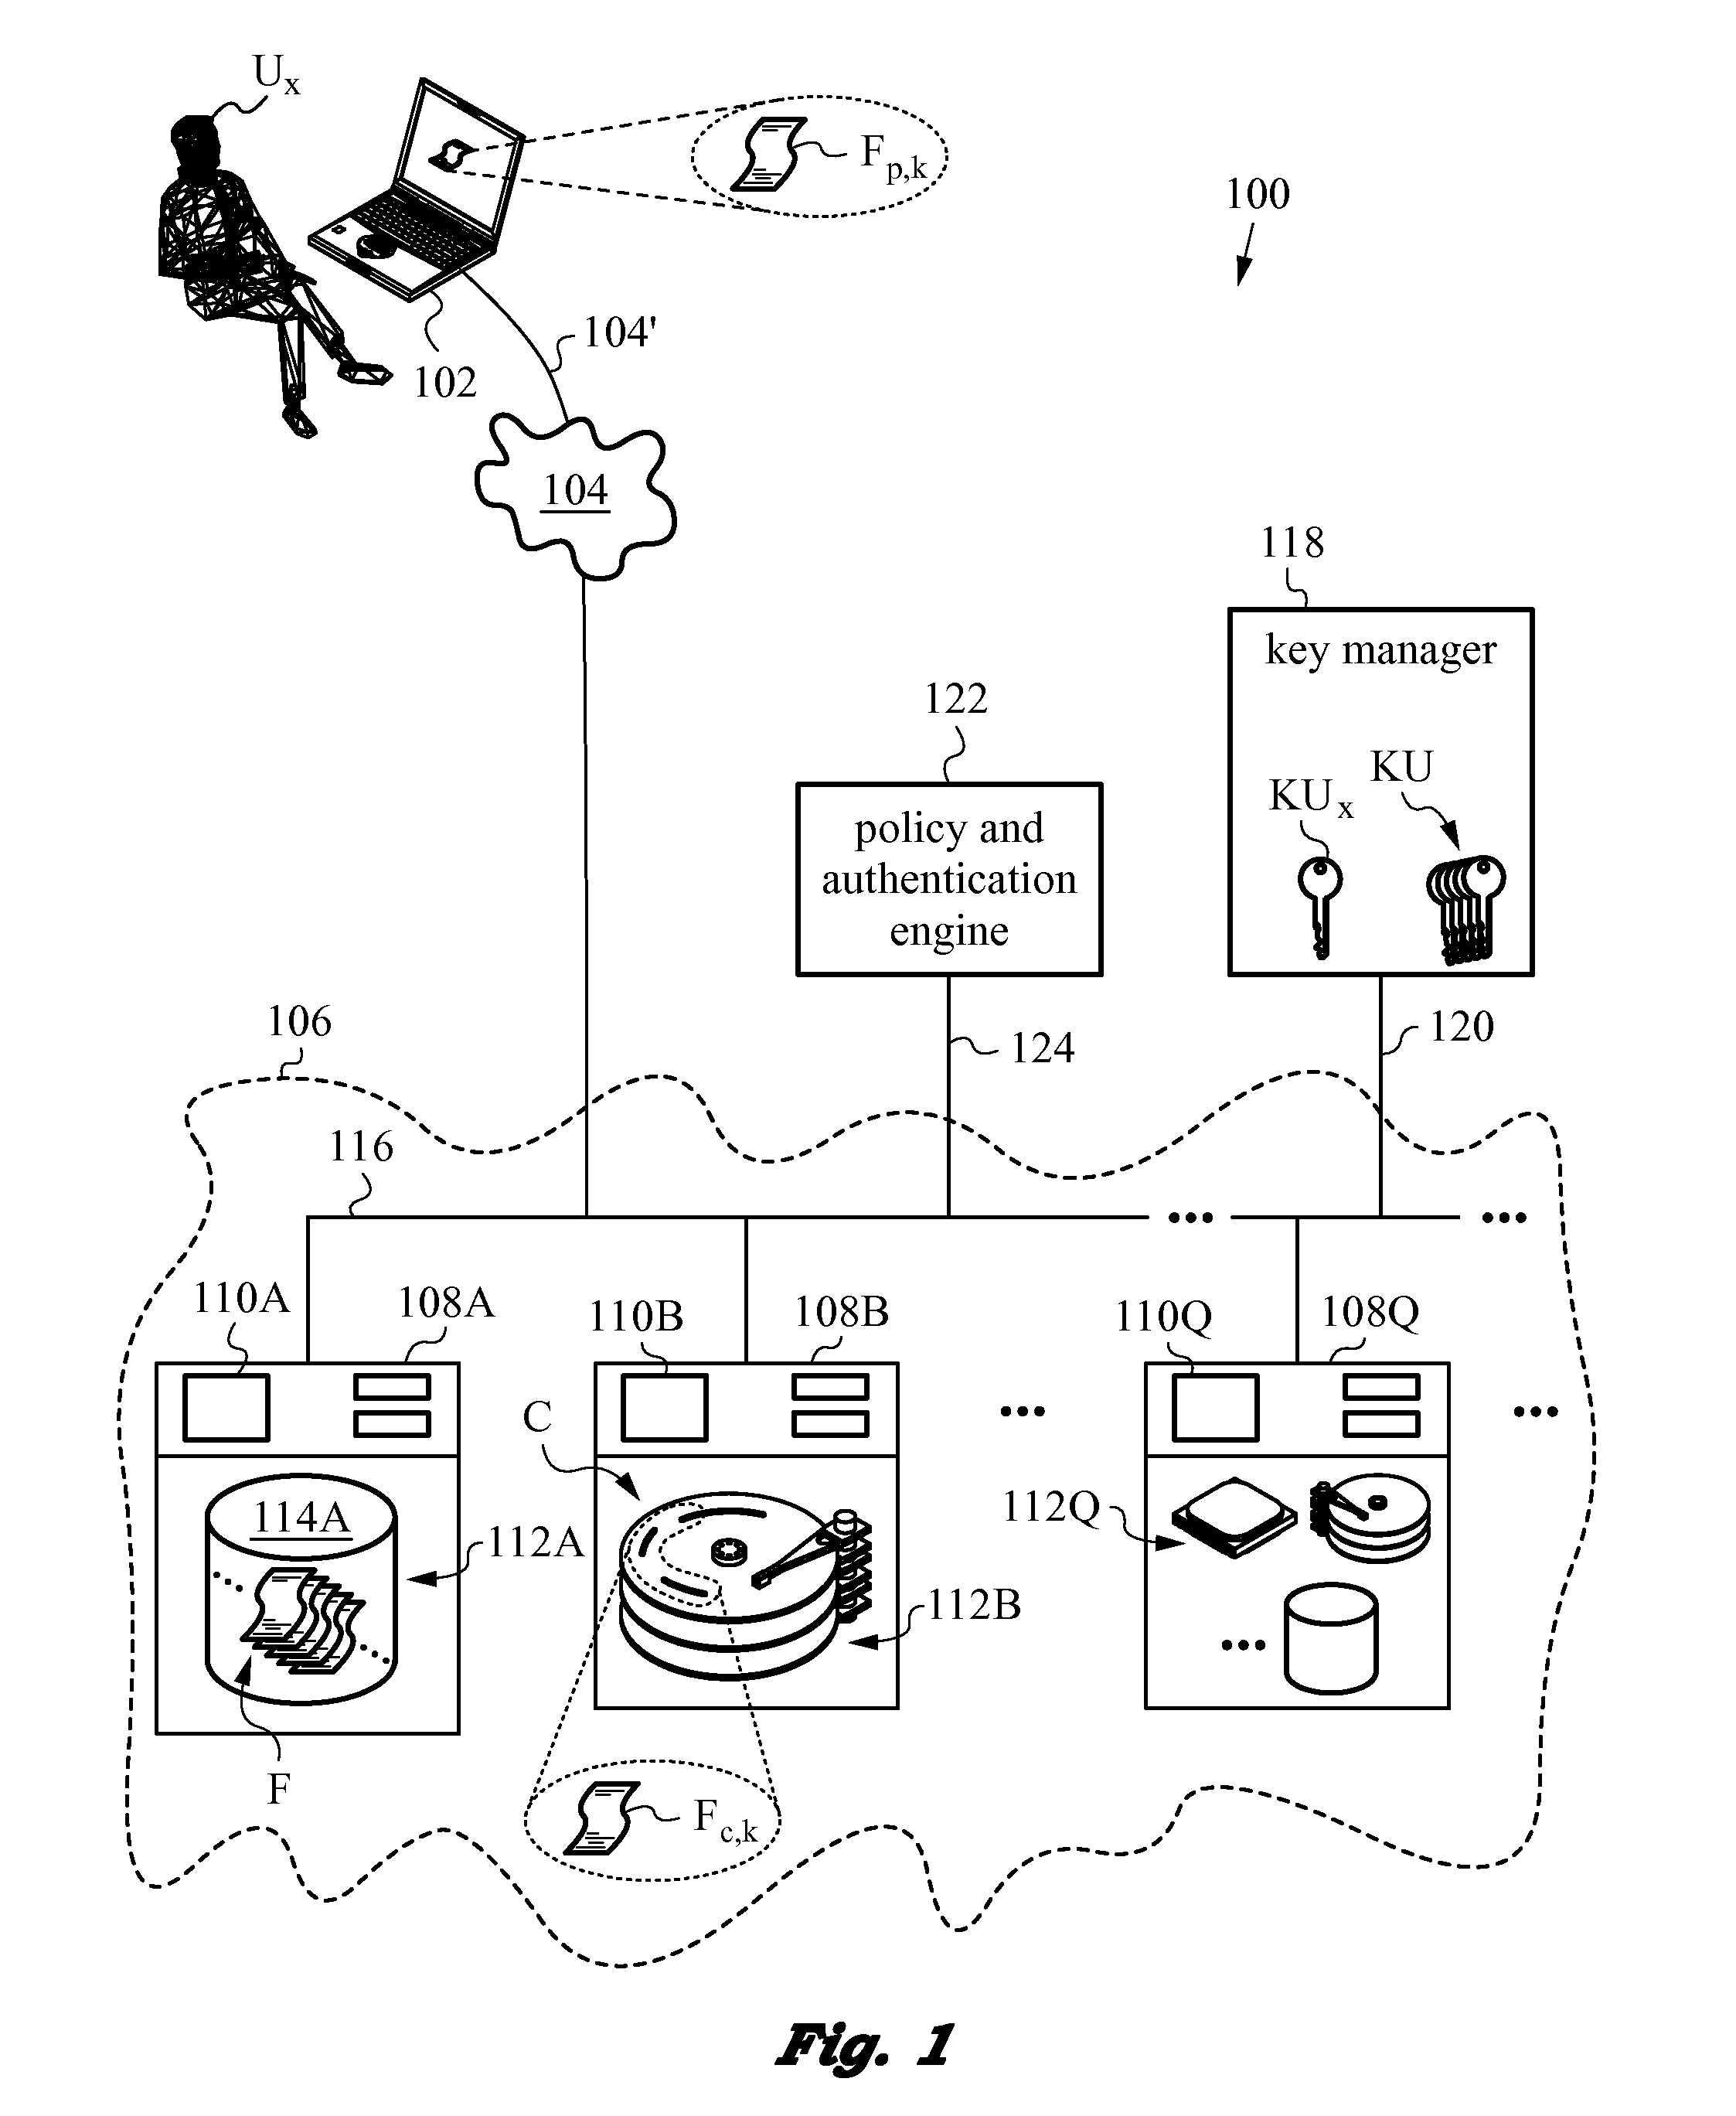 Method of securing files under the semi-trusted user threat model using symmetric keys and per-block key encryption